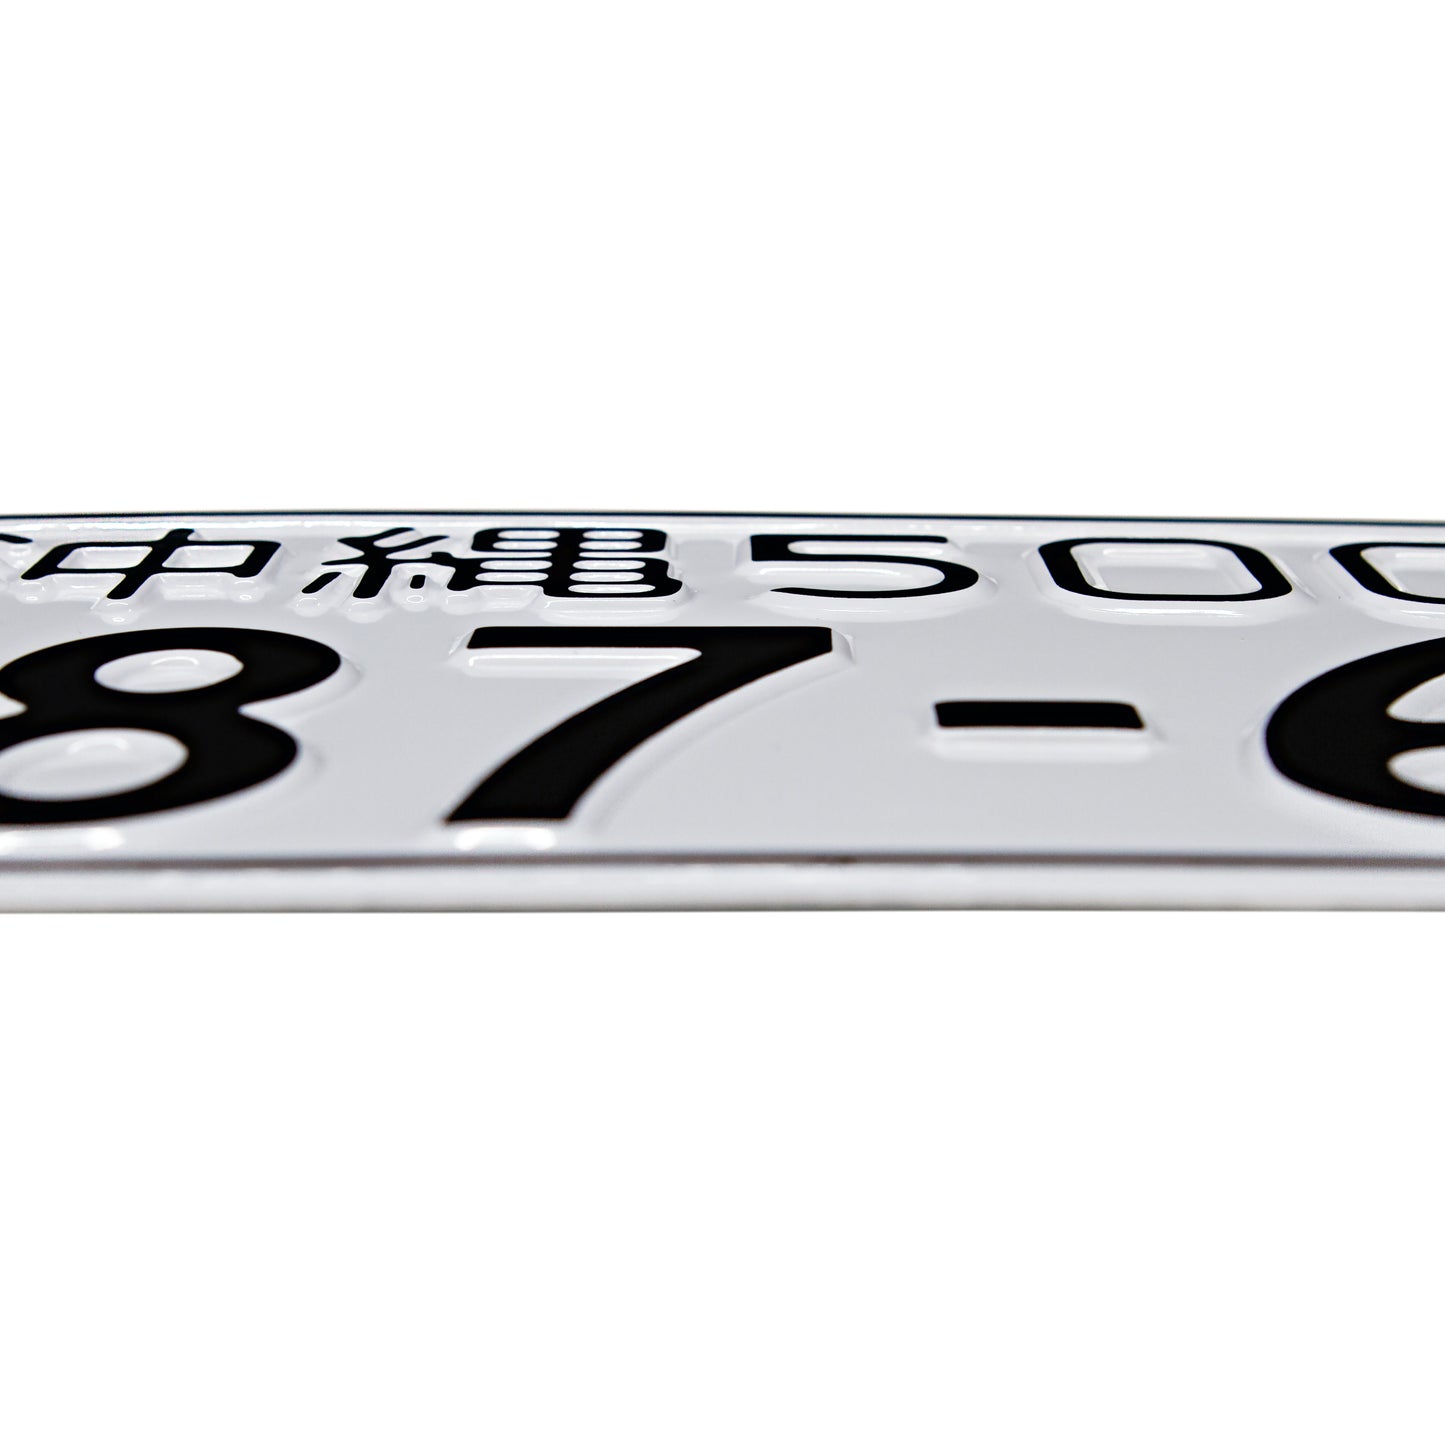 Japanese license plate gloss white with black text embossed text